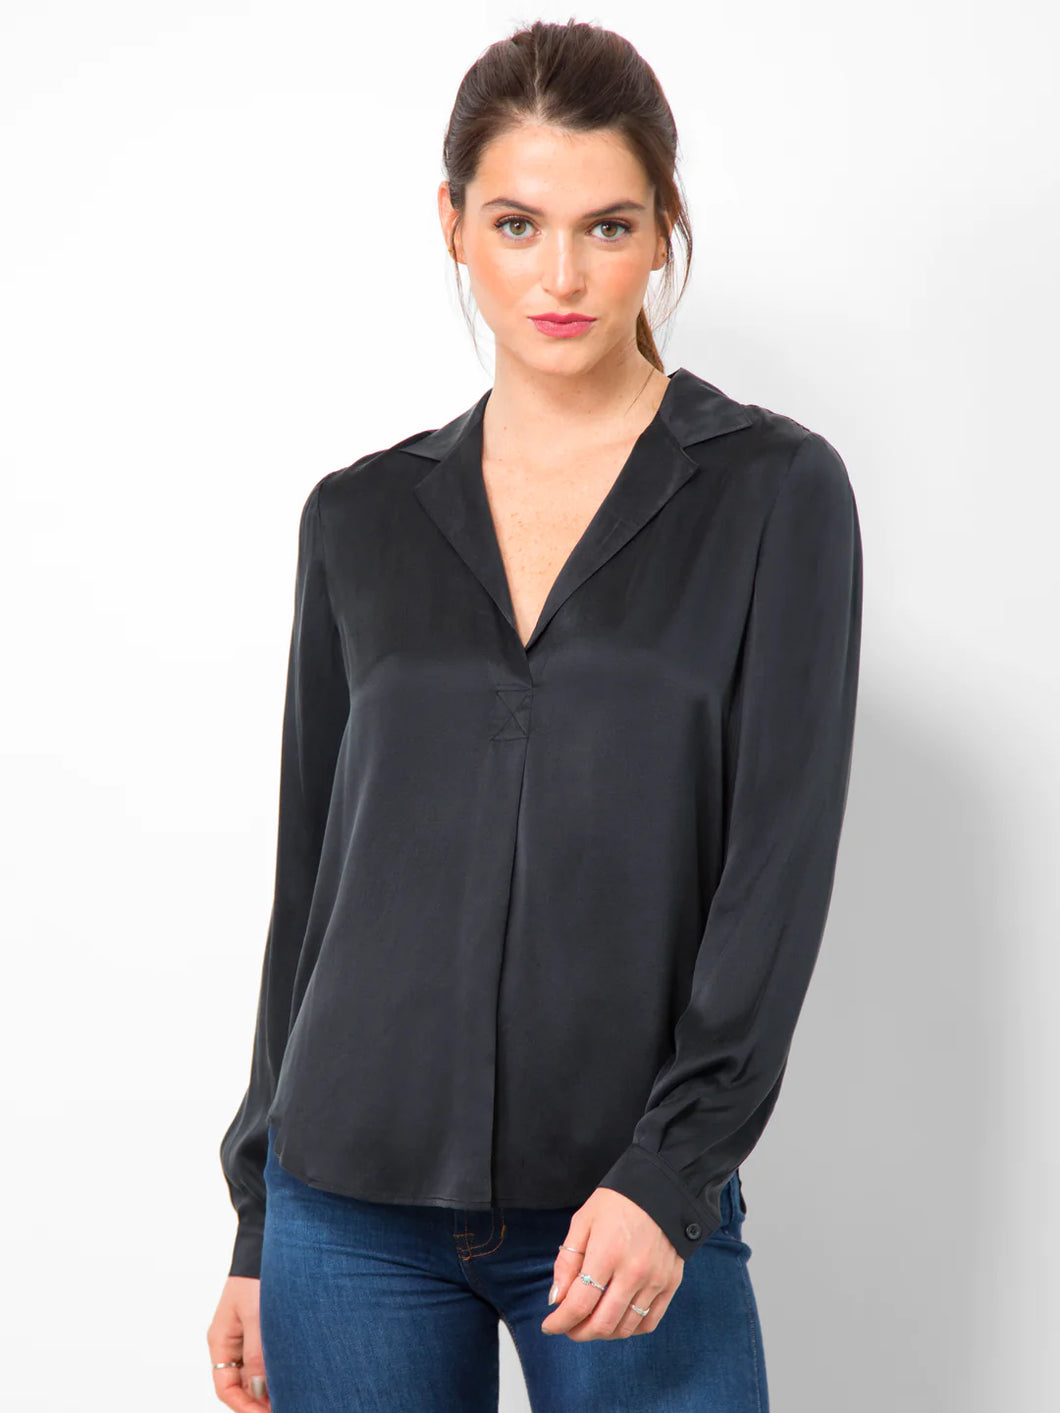 Go Luxe Anywhere Top